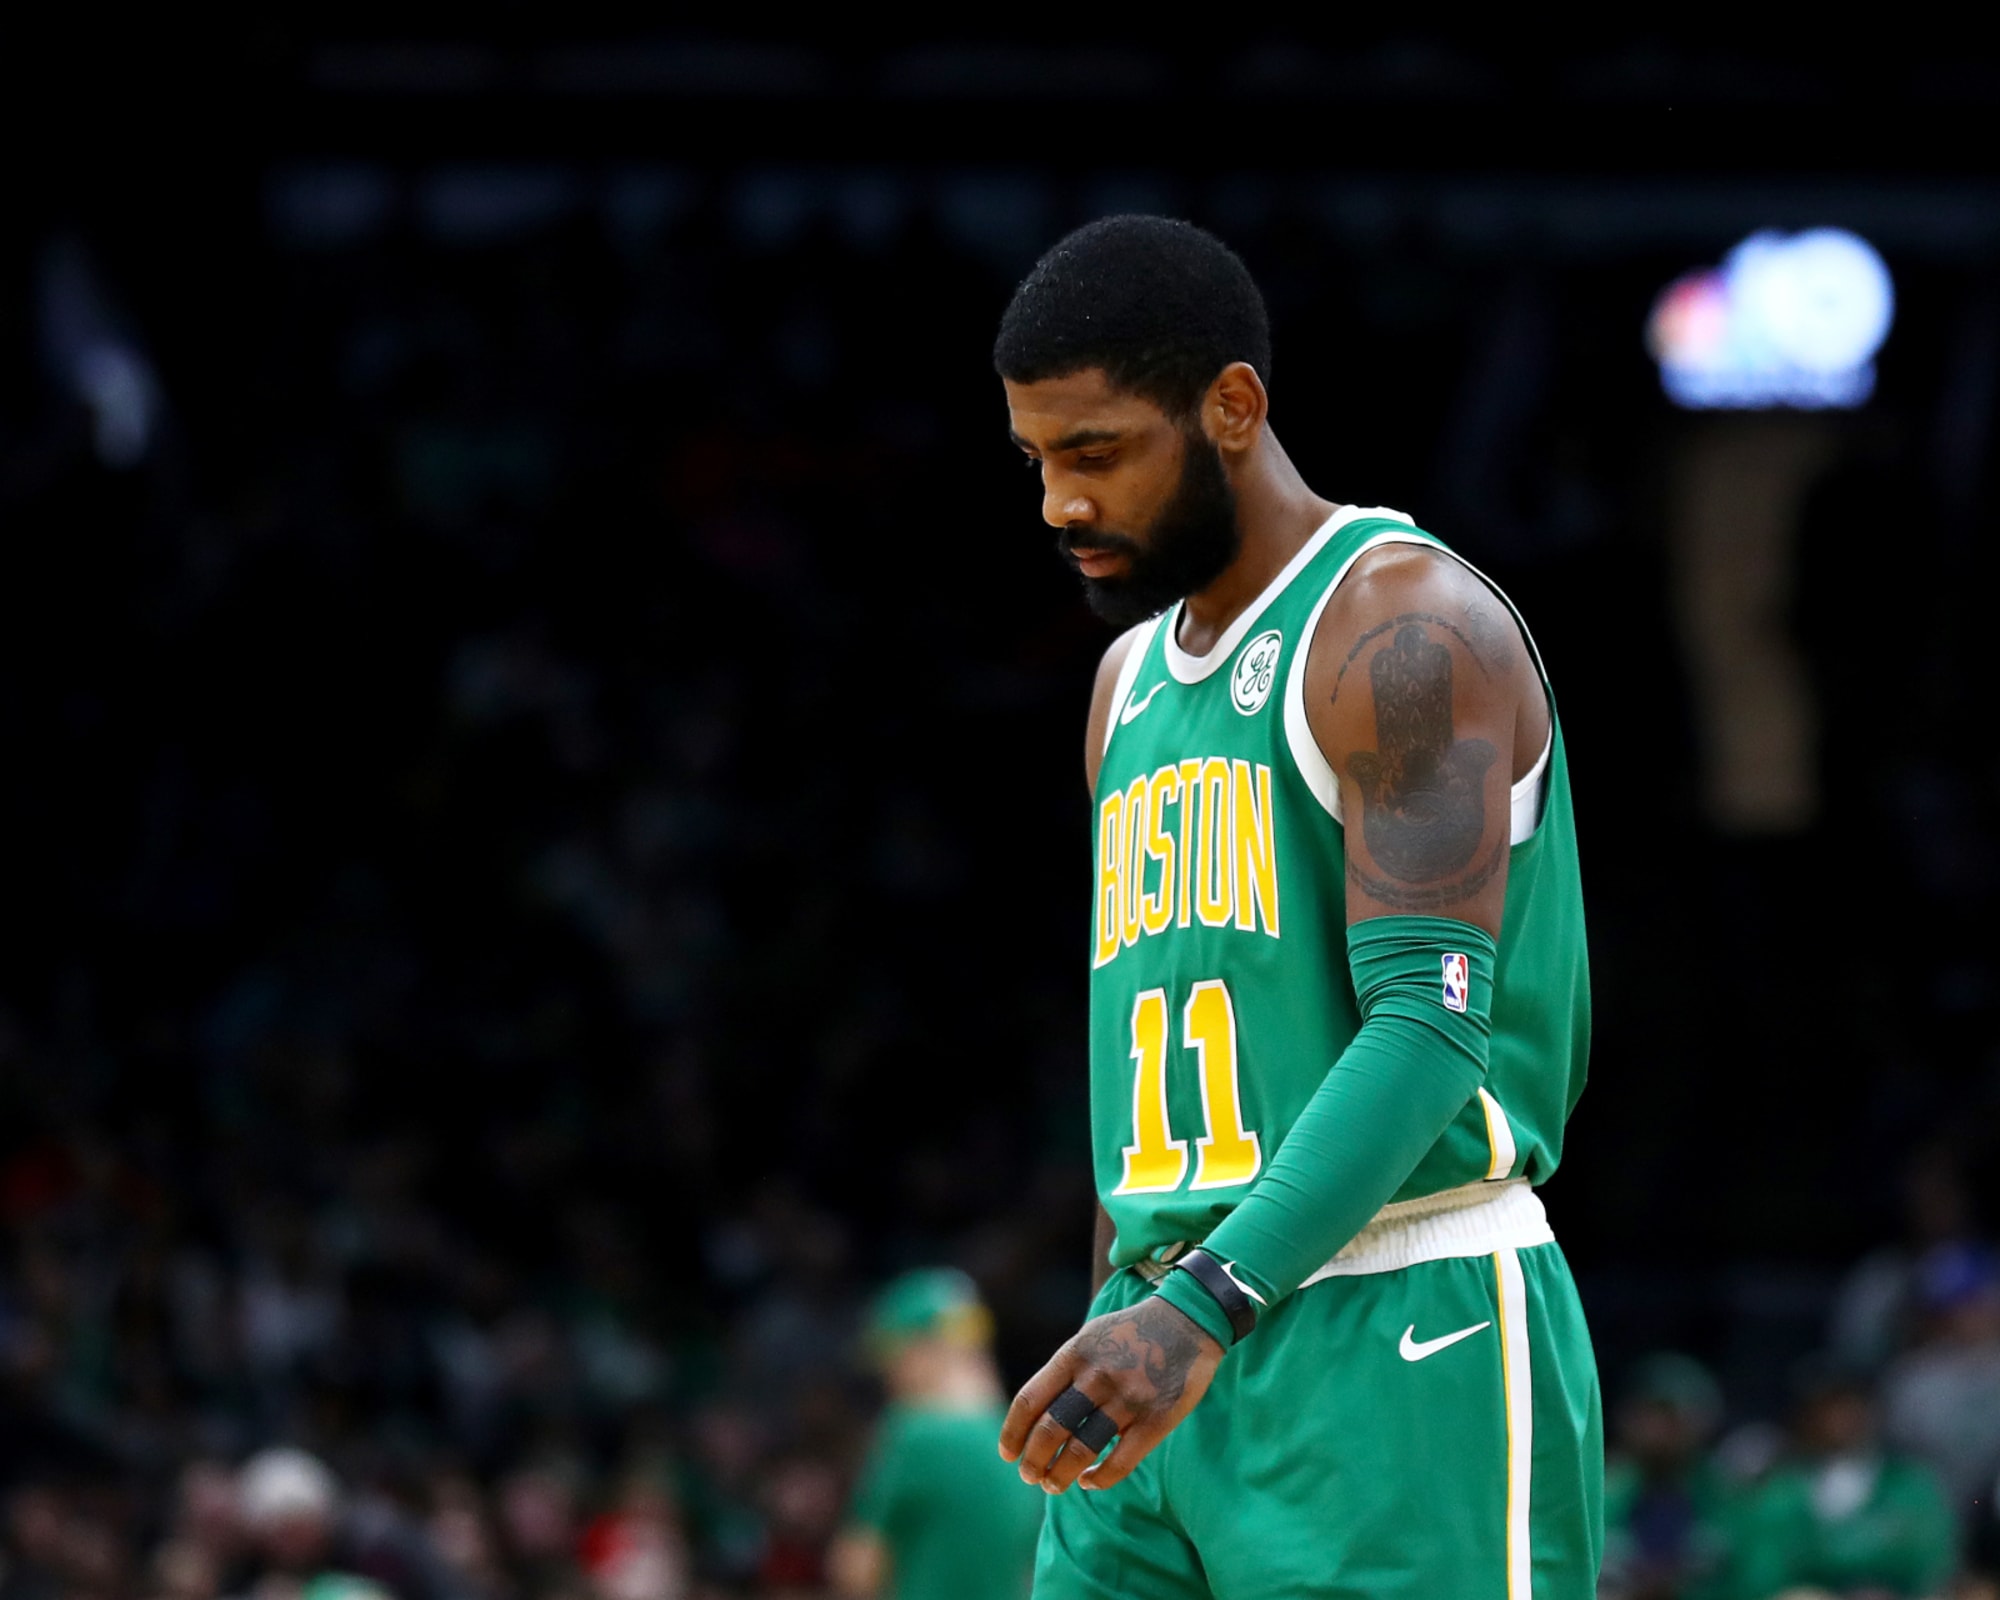 Kyrie Irving - Boston Celtics - Opening Night Game-Worn Jersey Charity  Auction (Double-Double) - OneAmericaAppeal.org